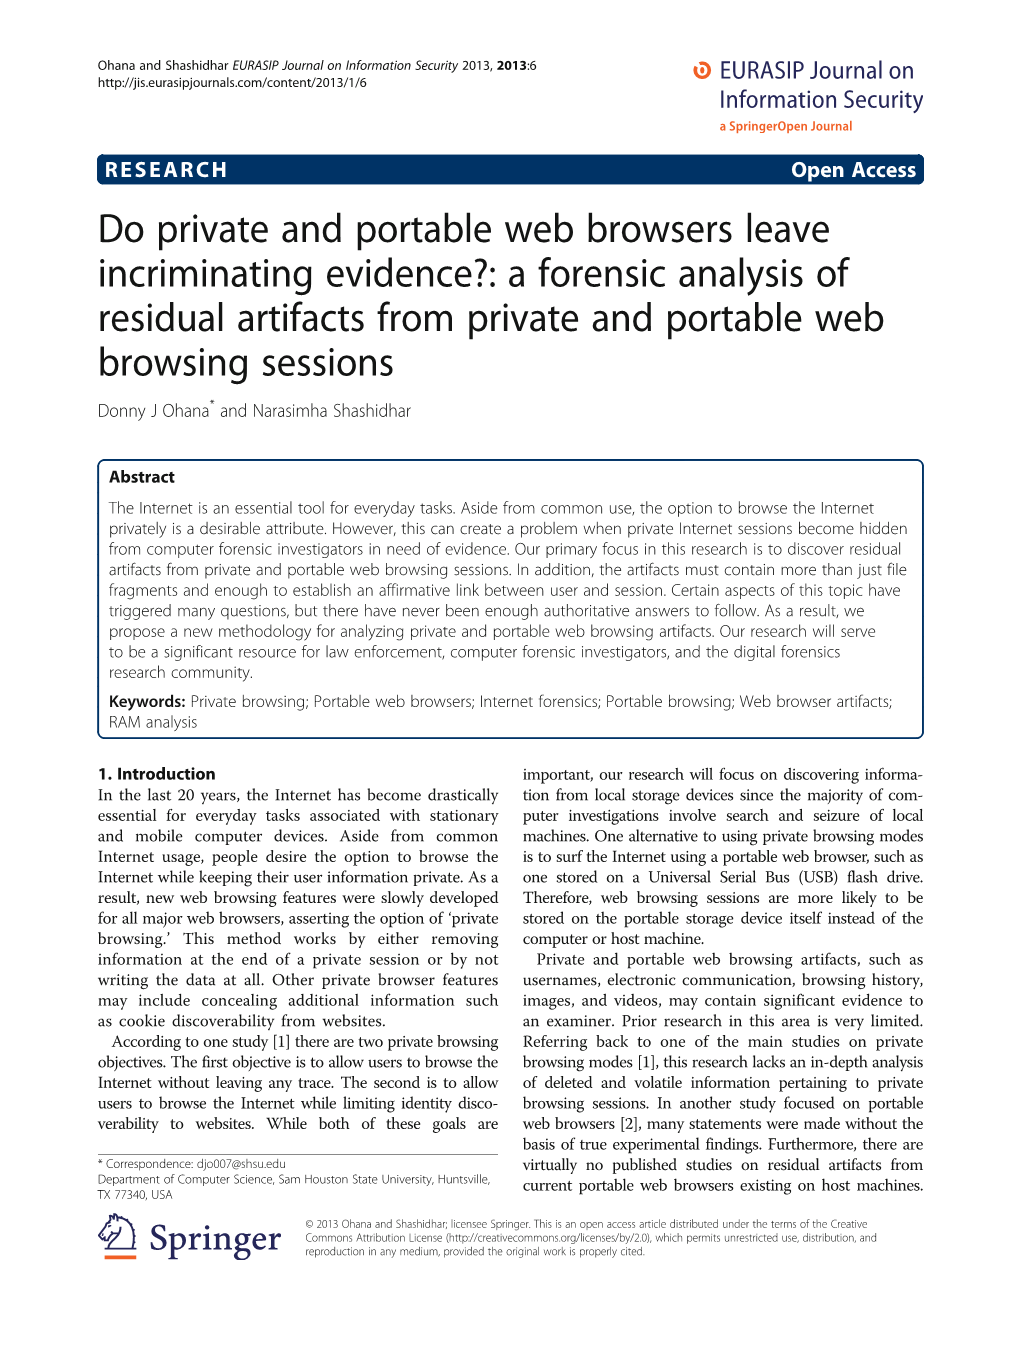 Do Private and Portable Web Browsers Leave Incriminating